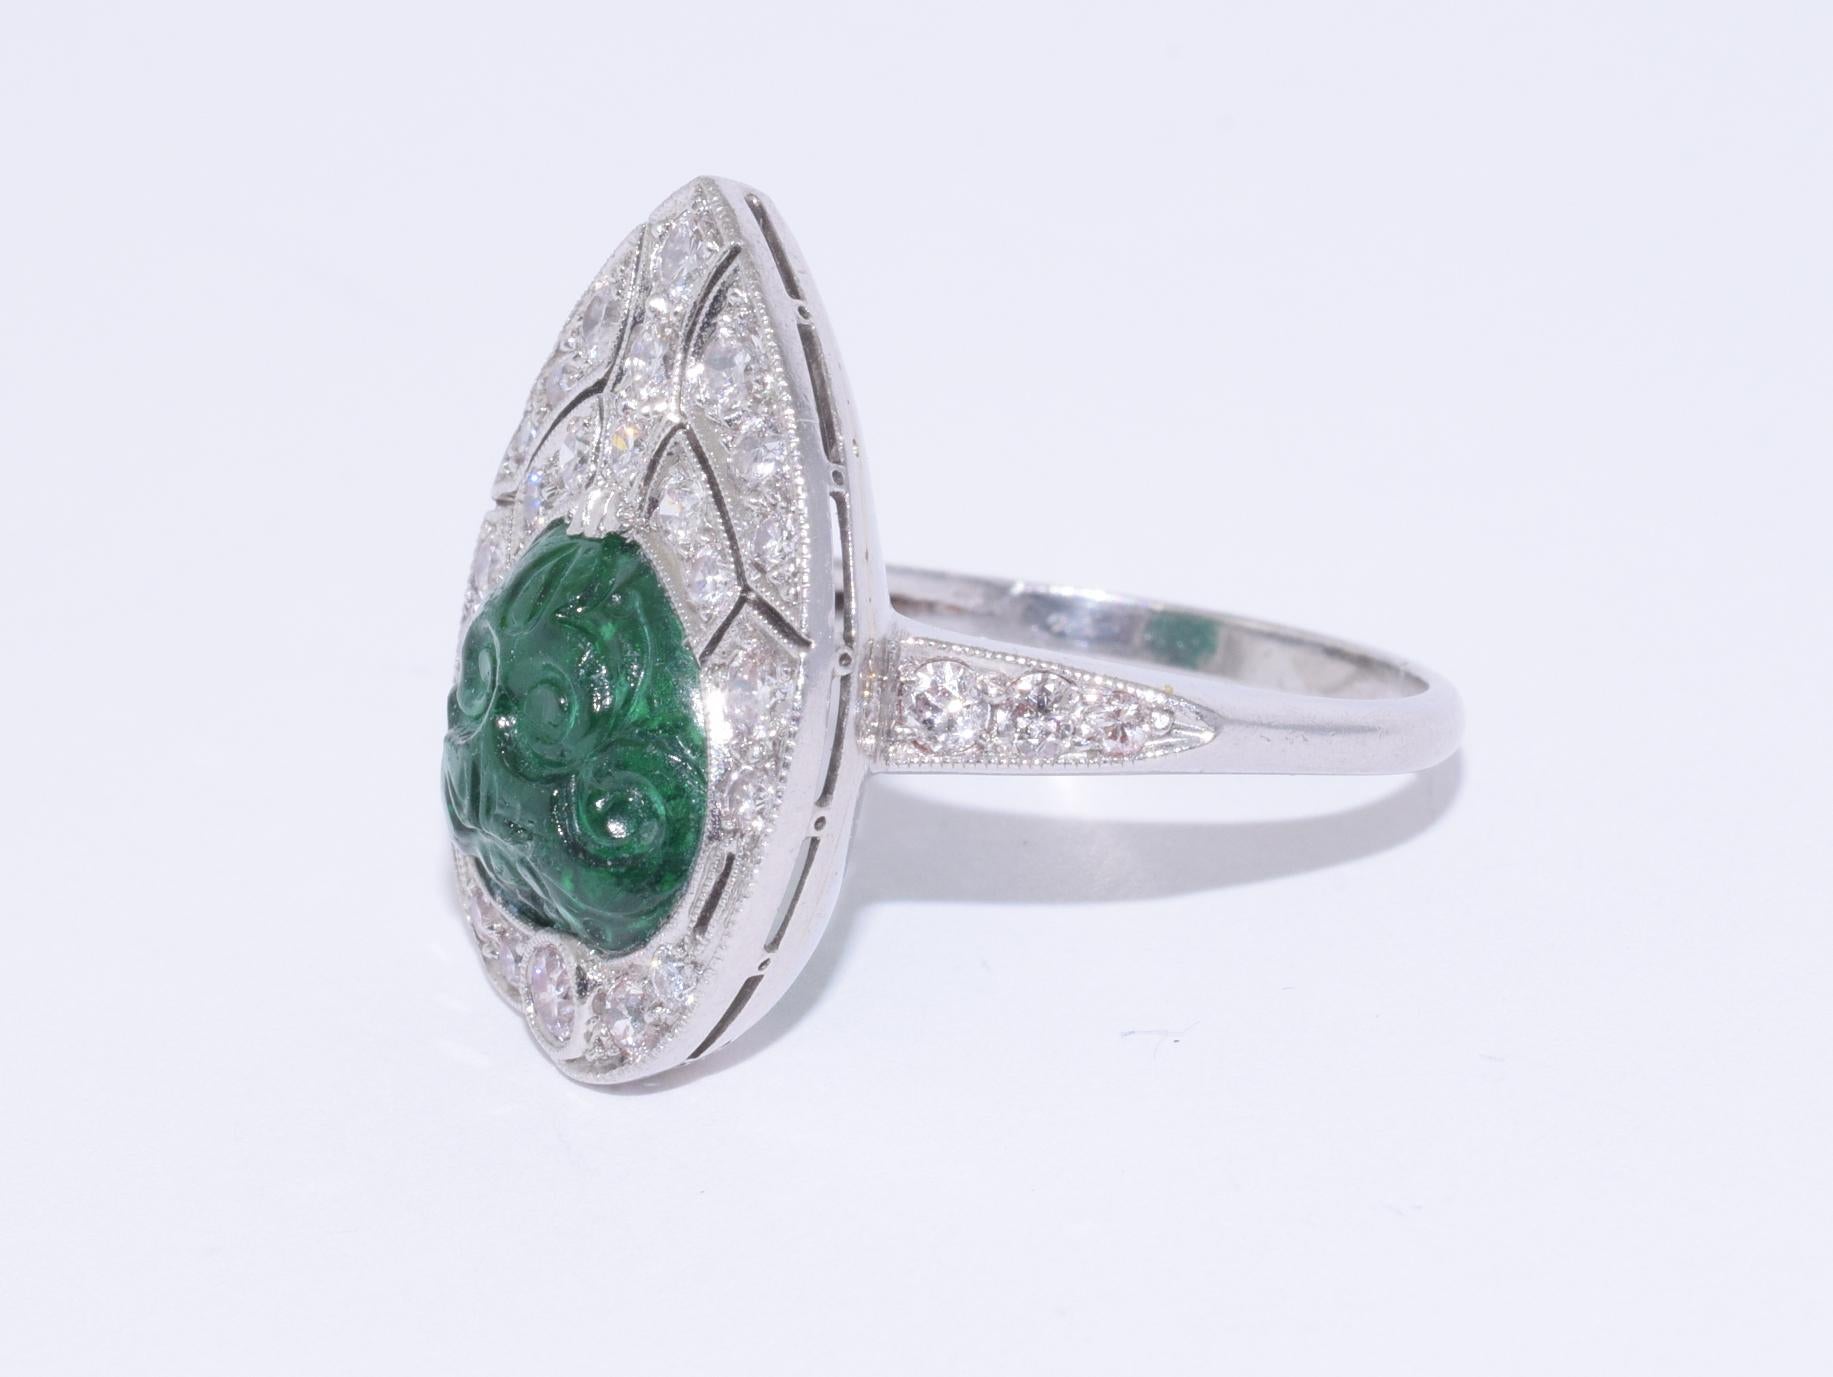 Cabochon Art Deco Carved Emerald and Diamond Ring